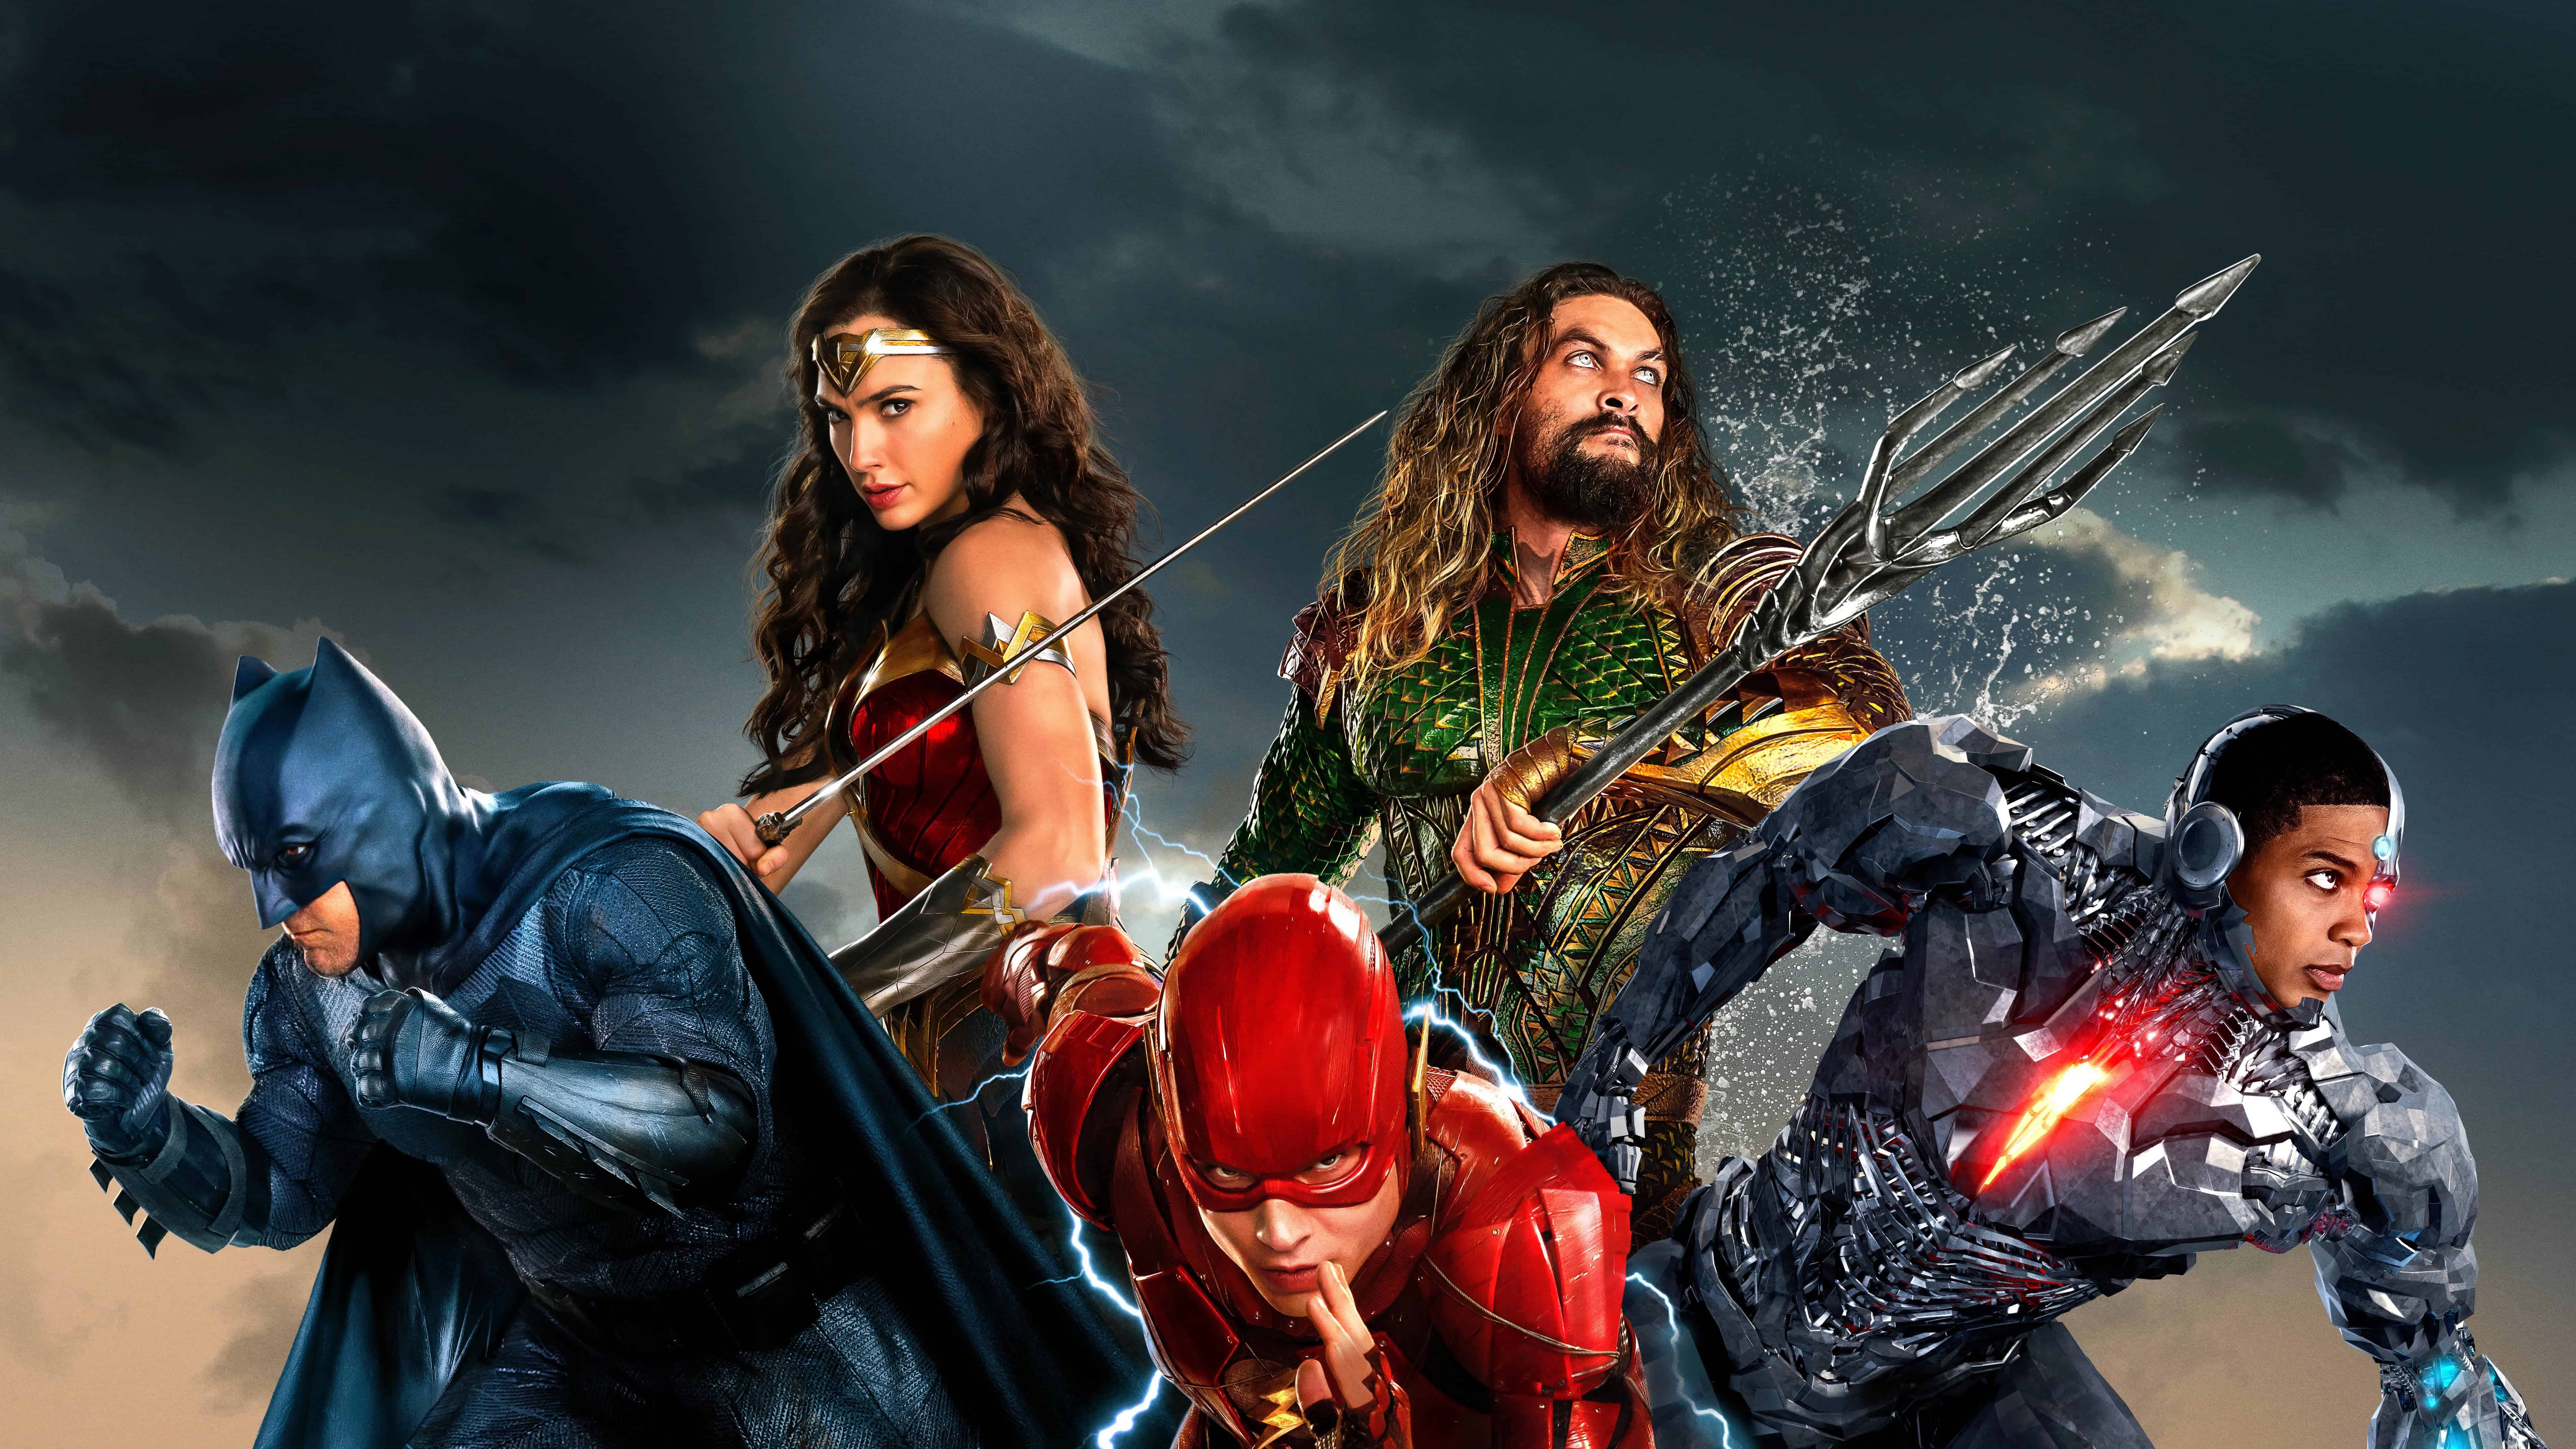 justice league wallpaper,fictional character,cg artwork,games,action adventure game,movie